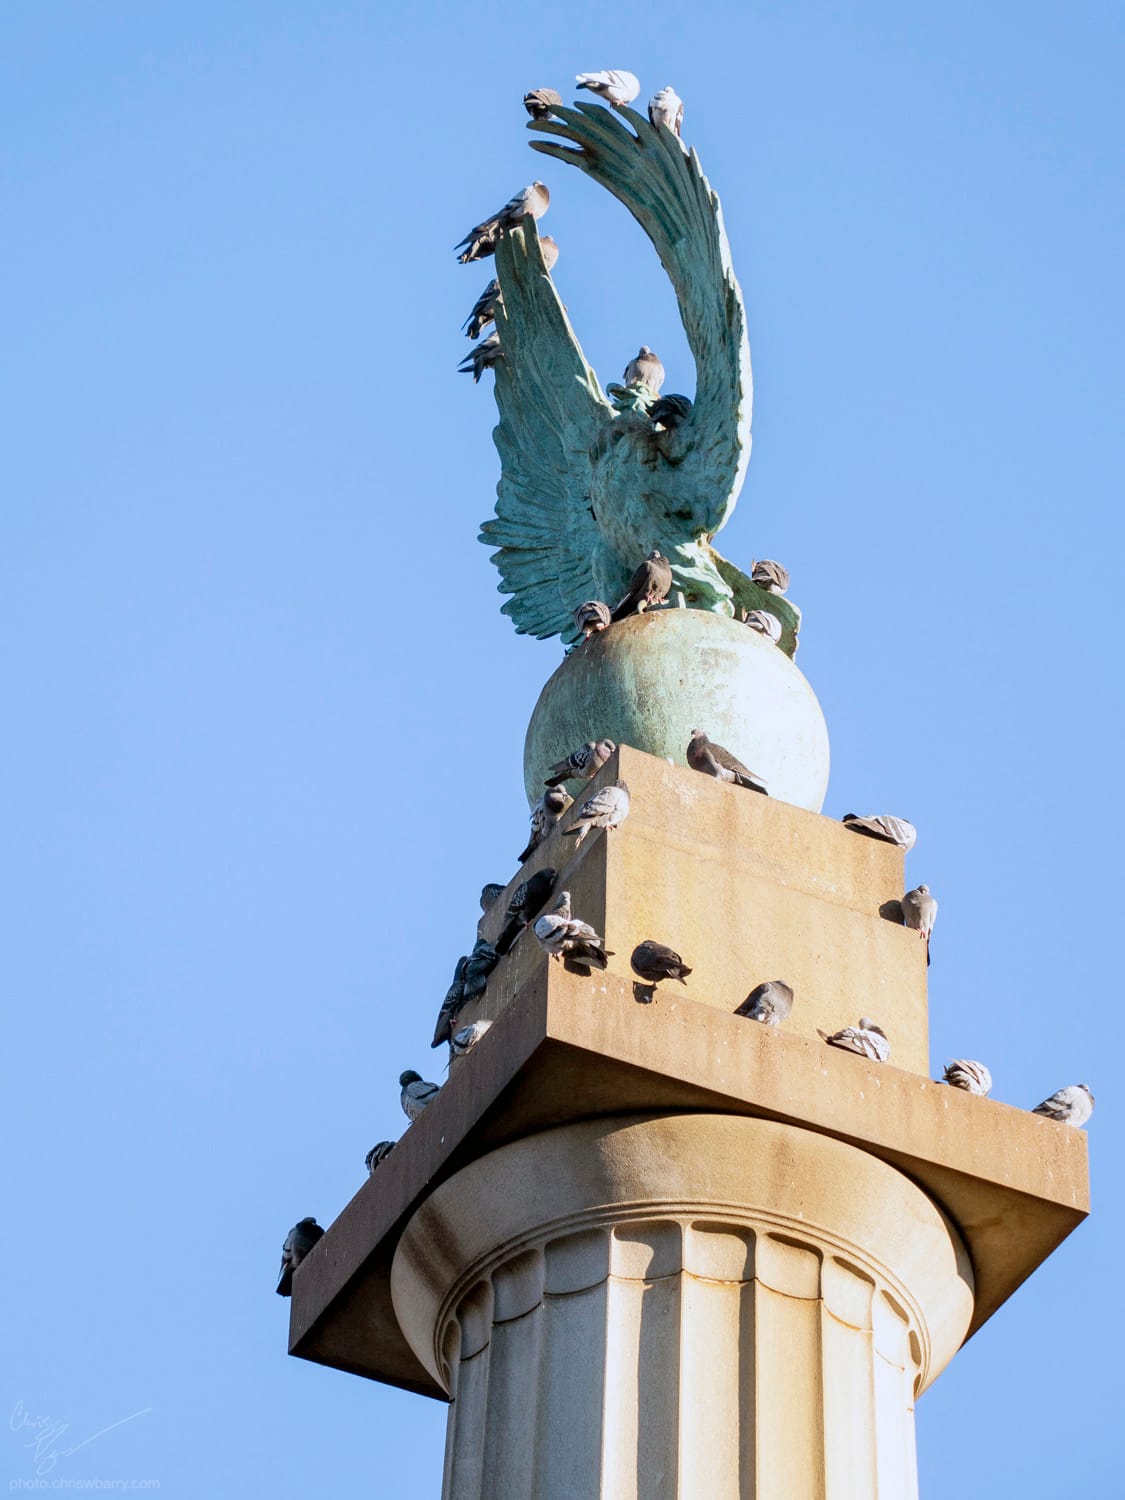 A large number of pigeons resting on top of a pillar with a blue tarnished copper eagle at the top